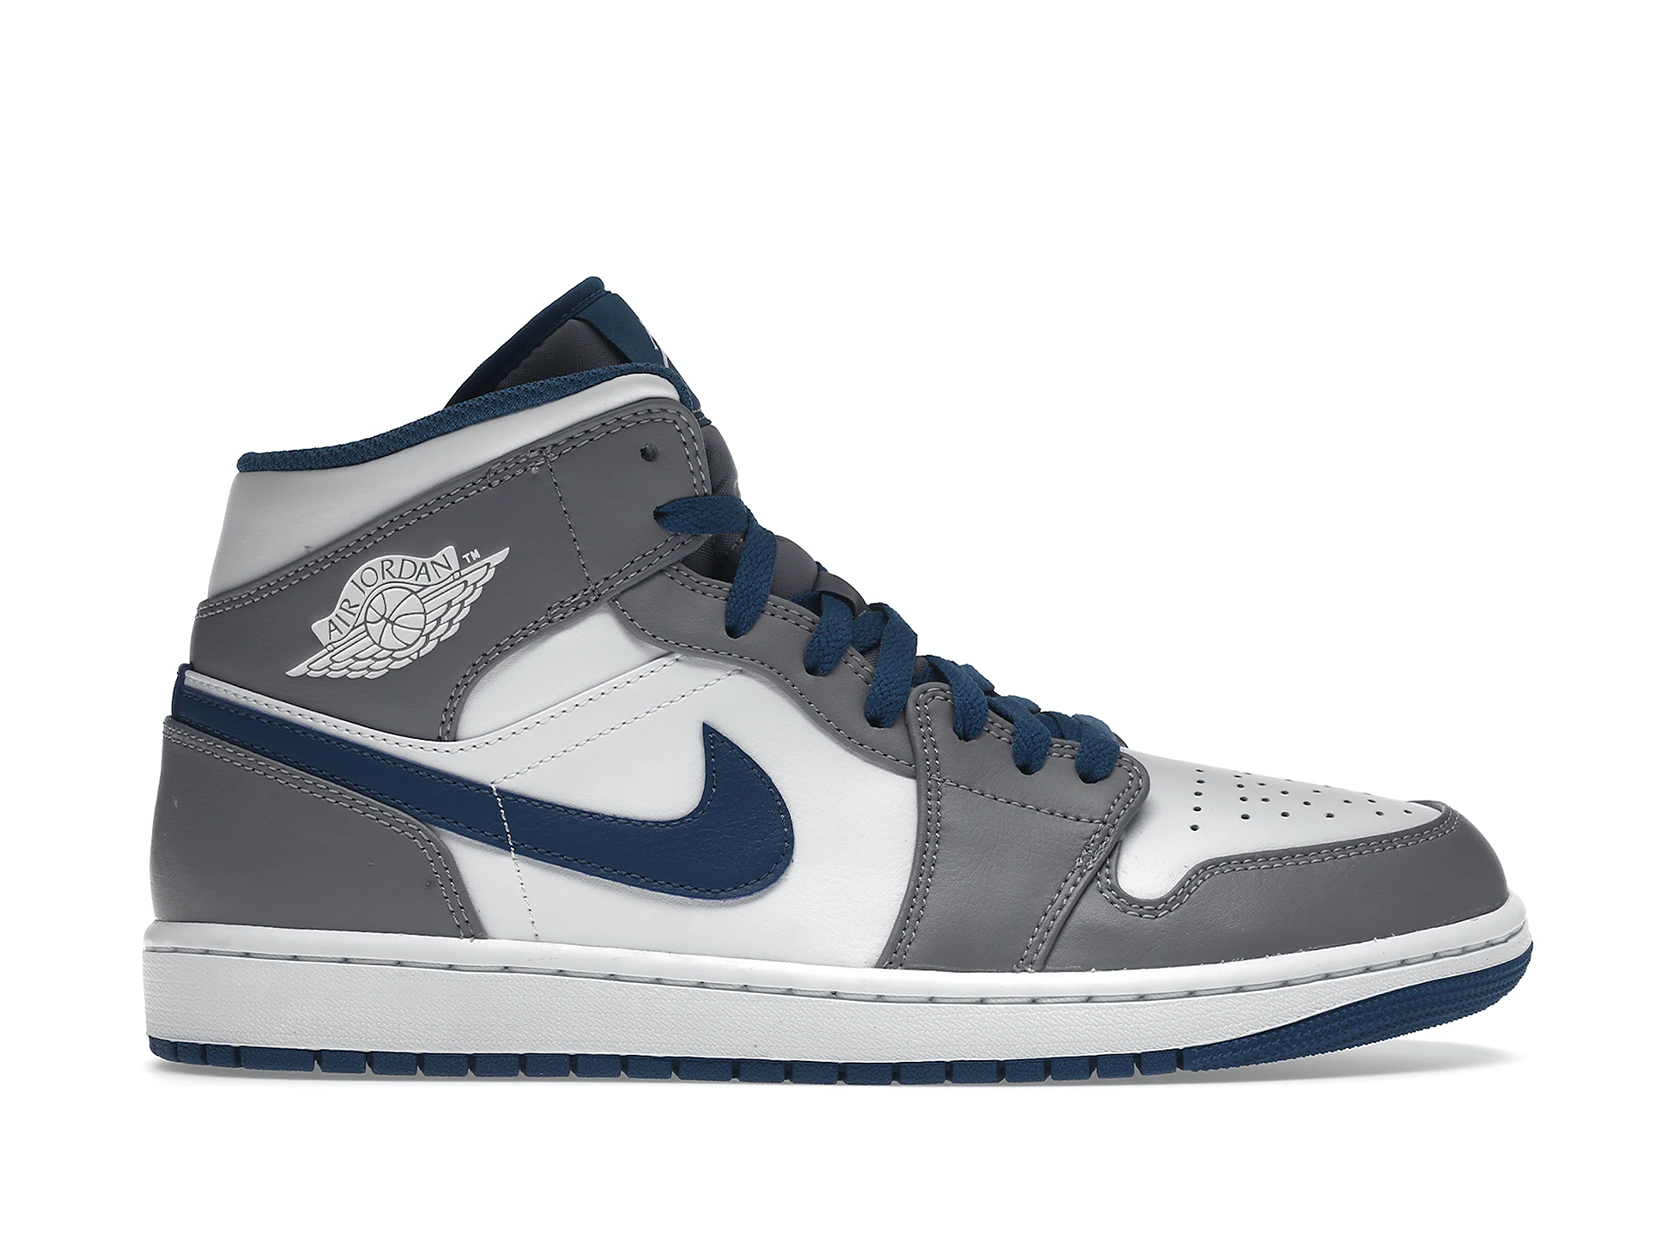 Double Boxed  129.99 Nike Air Jordan 1 Mid Cement True Blue Double Boxed